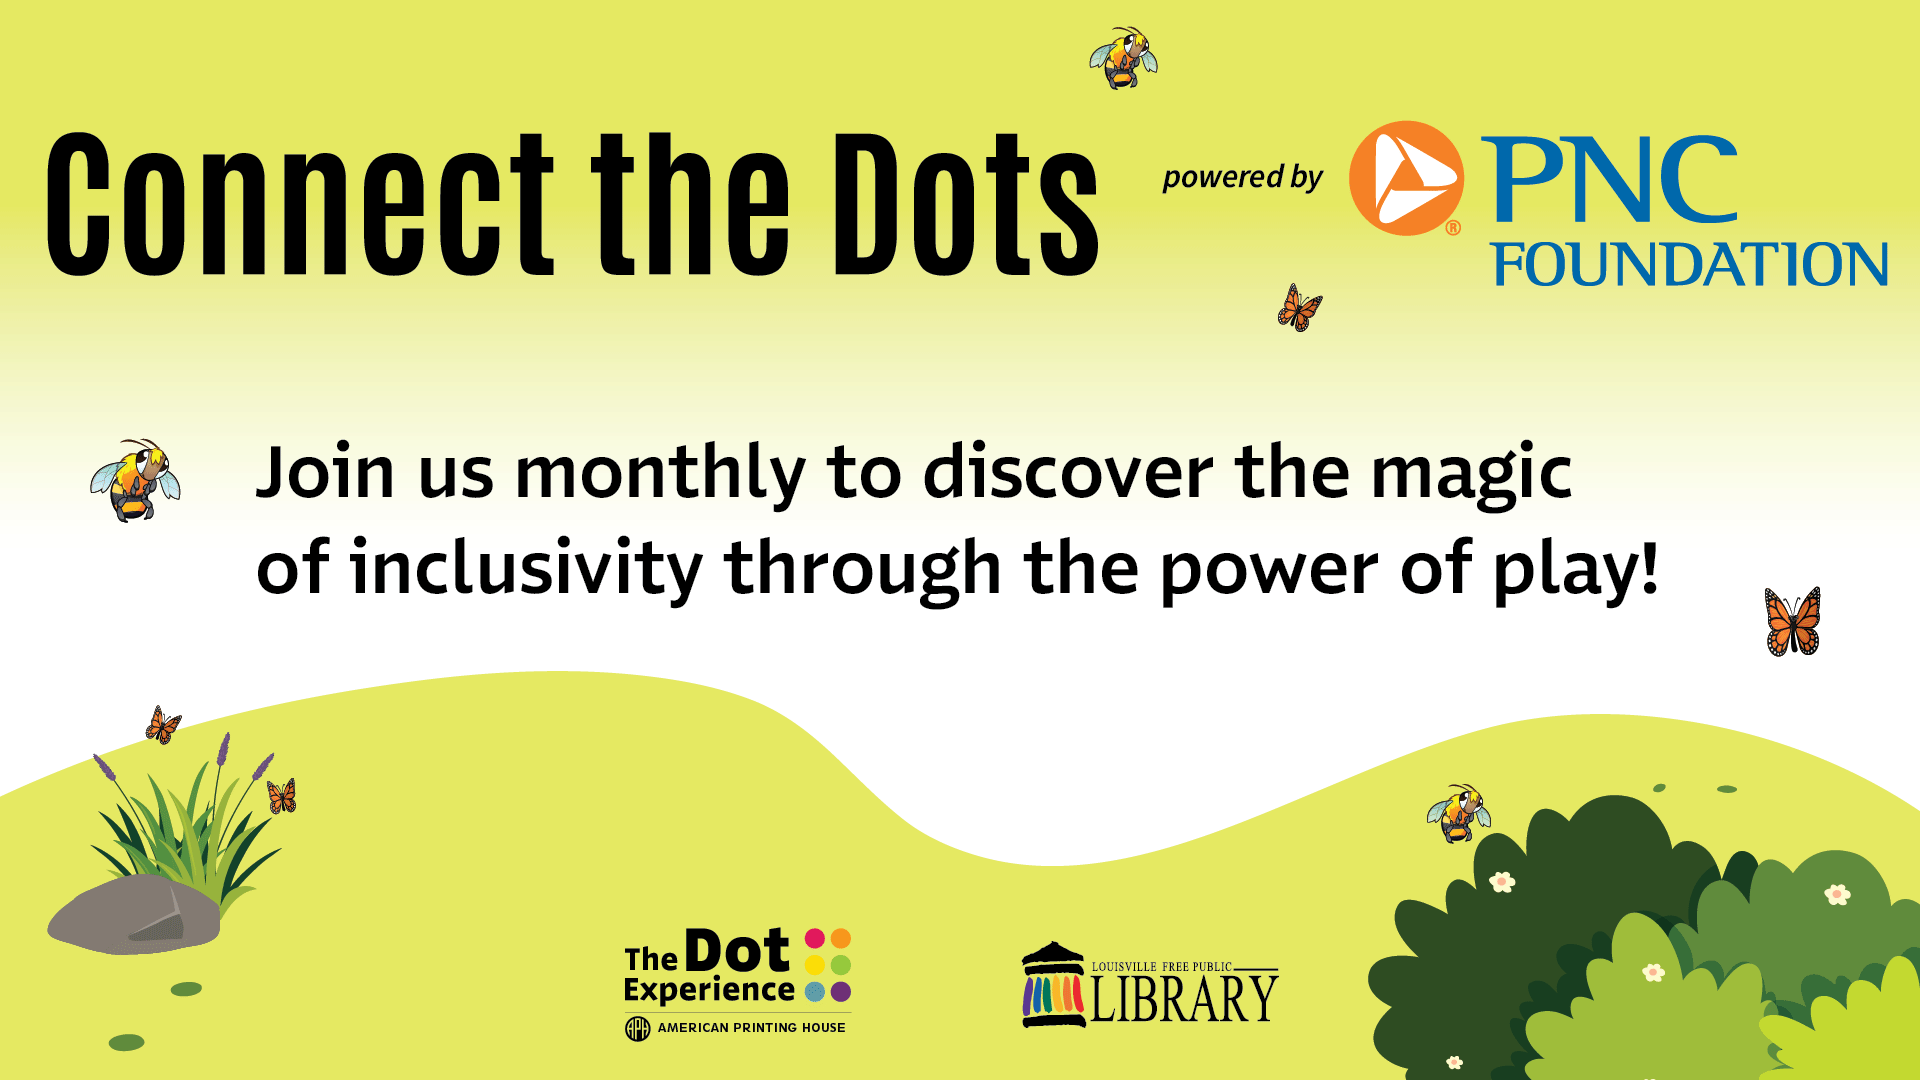 Connect the Dots Graphic - Join us monthly to discover the magic of Inclusivity through the power of play. Sponsored by PNC Foundation